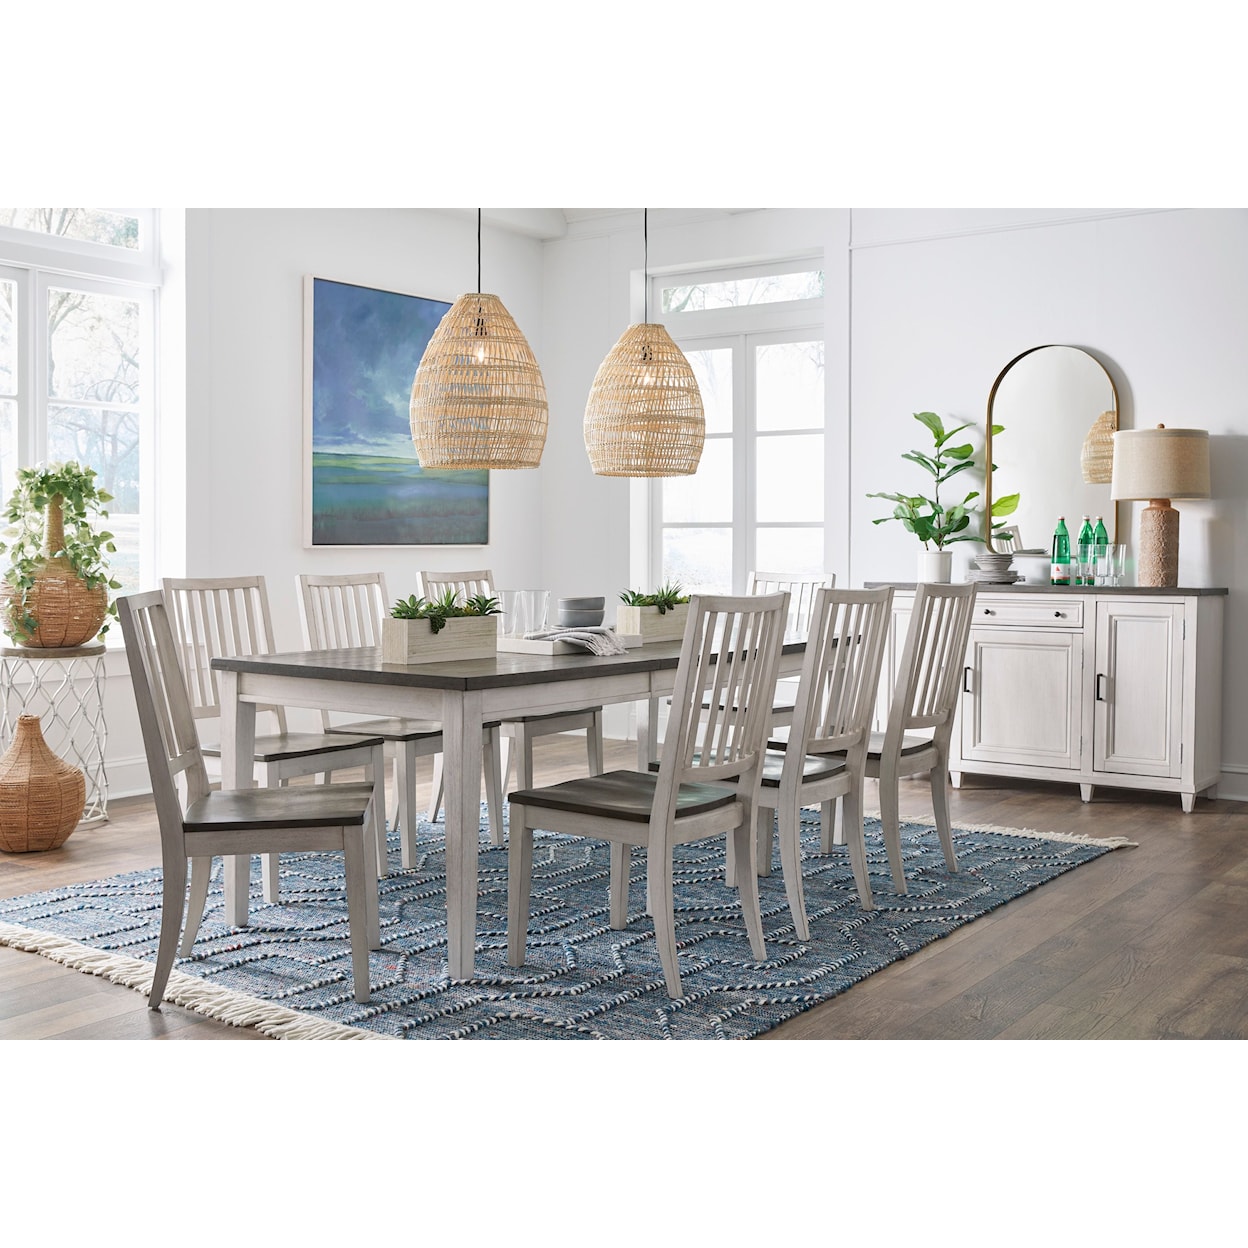 Aspenhome Caraway Dining Side Chair